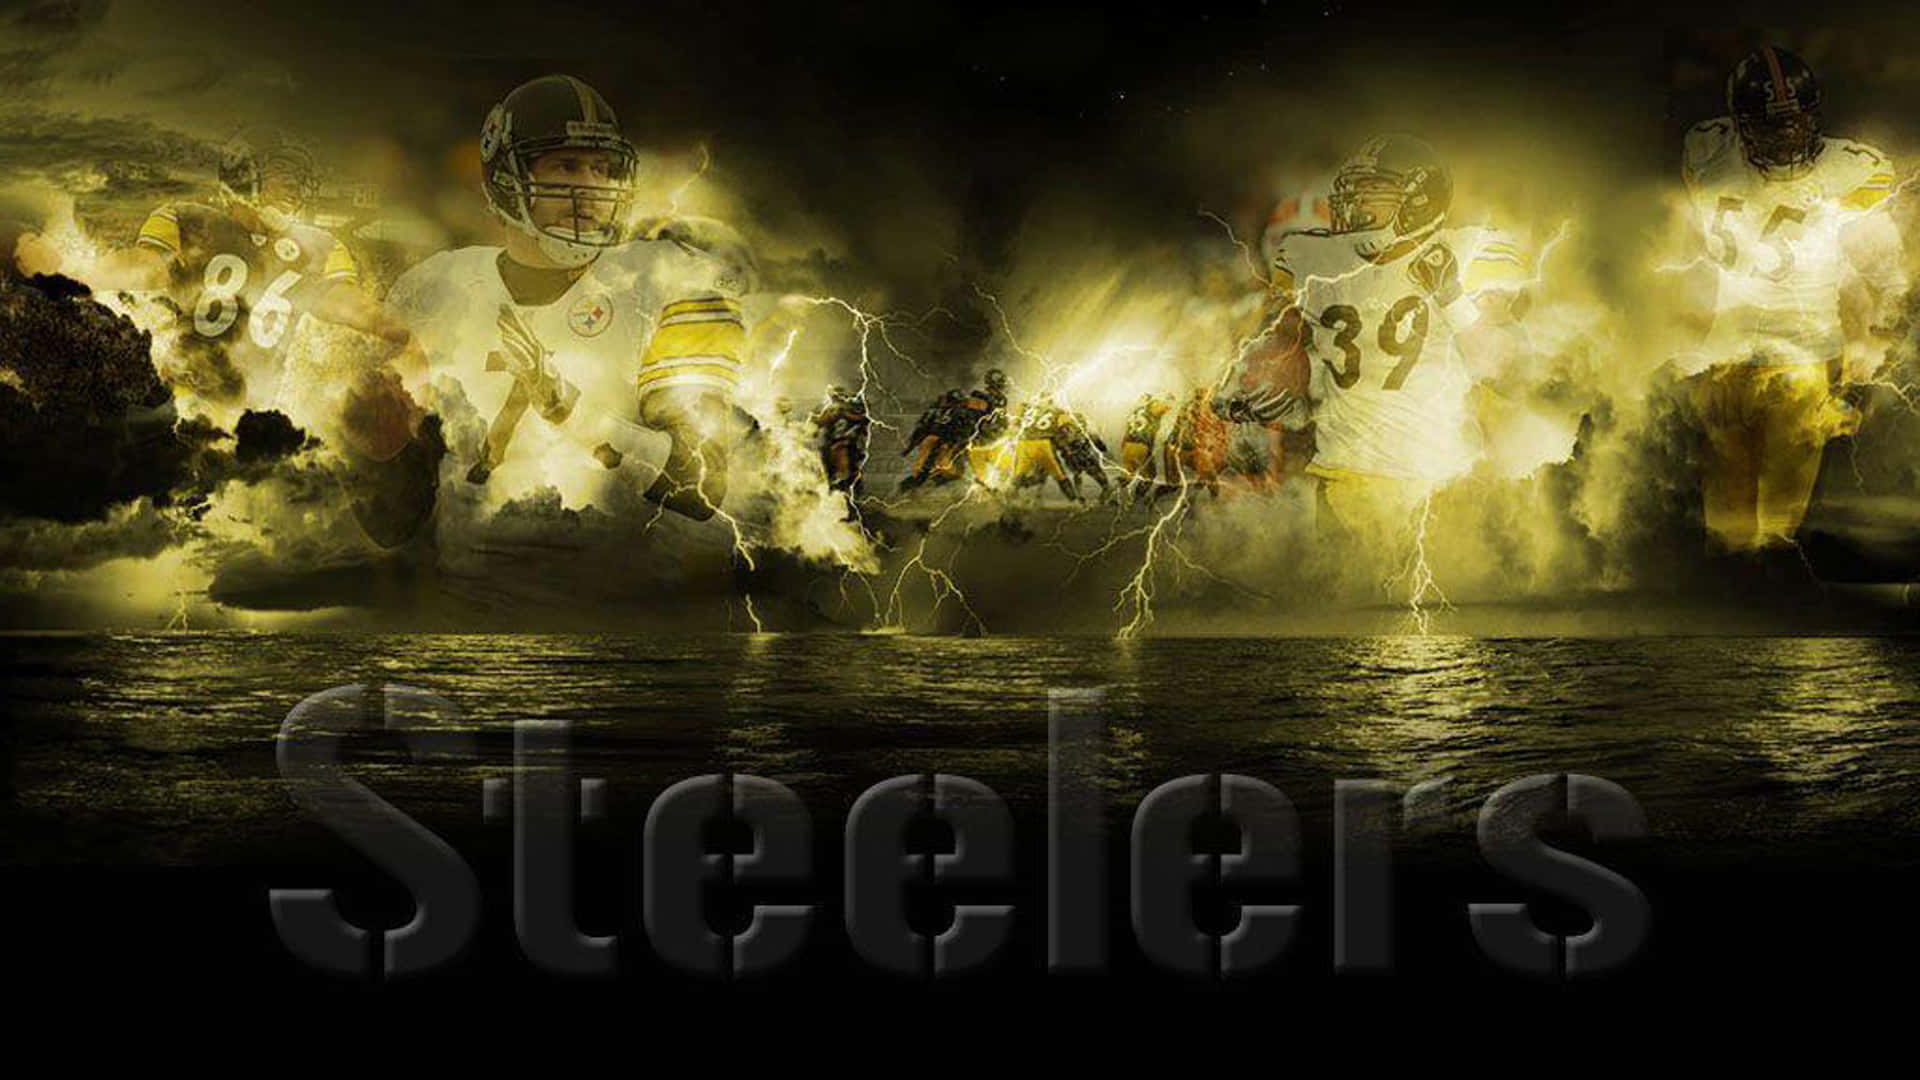 Get fired up with the officially licensed Pittsburgh Steelers mascot logo! Wallpaper